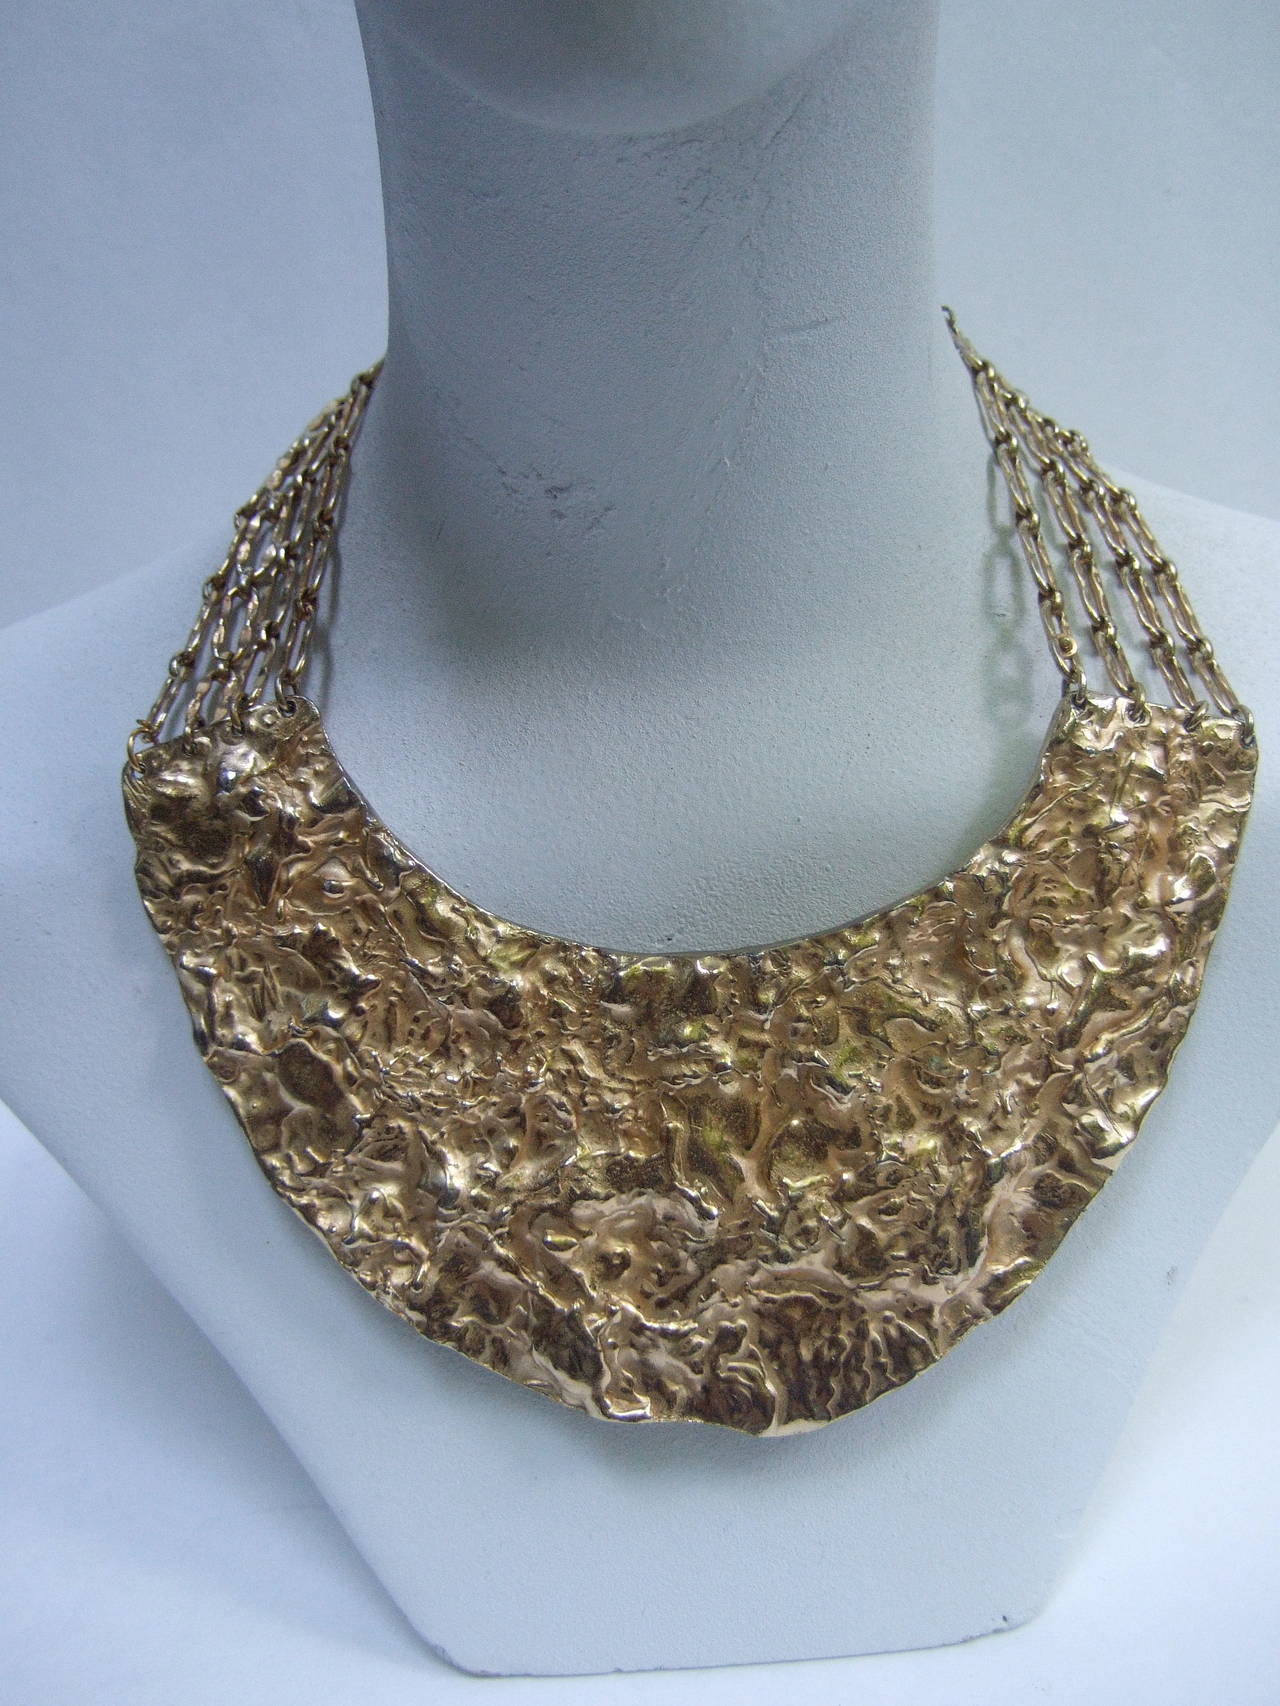 Massive hammered gilt metal collar necklace c 1970
The avant-garde statement necklace is designed 
with a modernist style large scale crescent plate

The center hammered plate is substantial in weight;
is suspended for a series of wide gilt